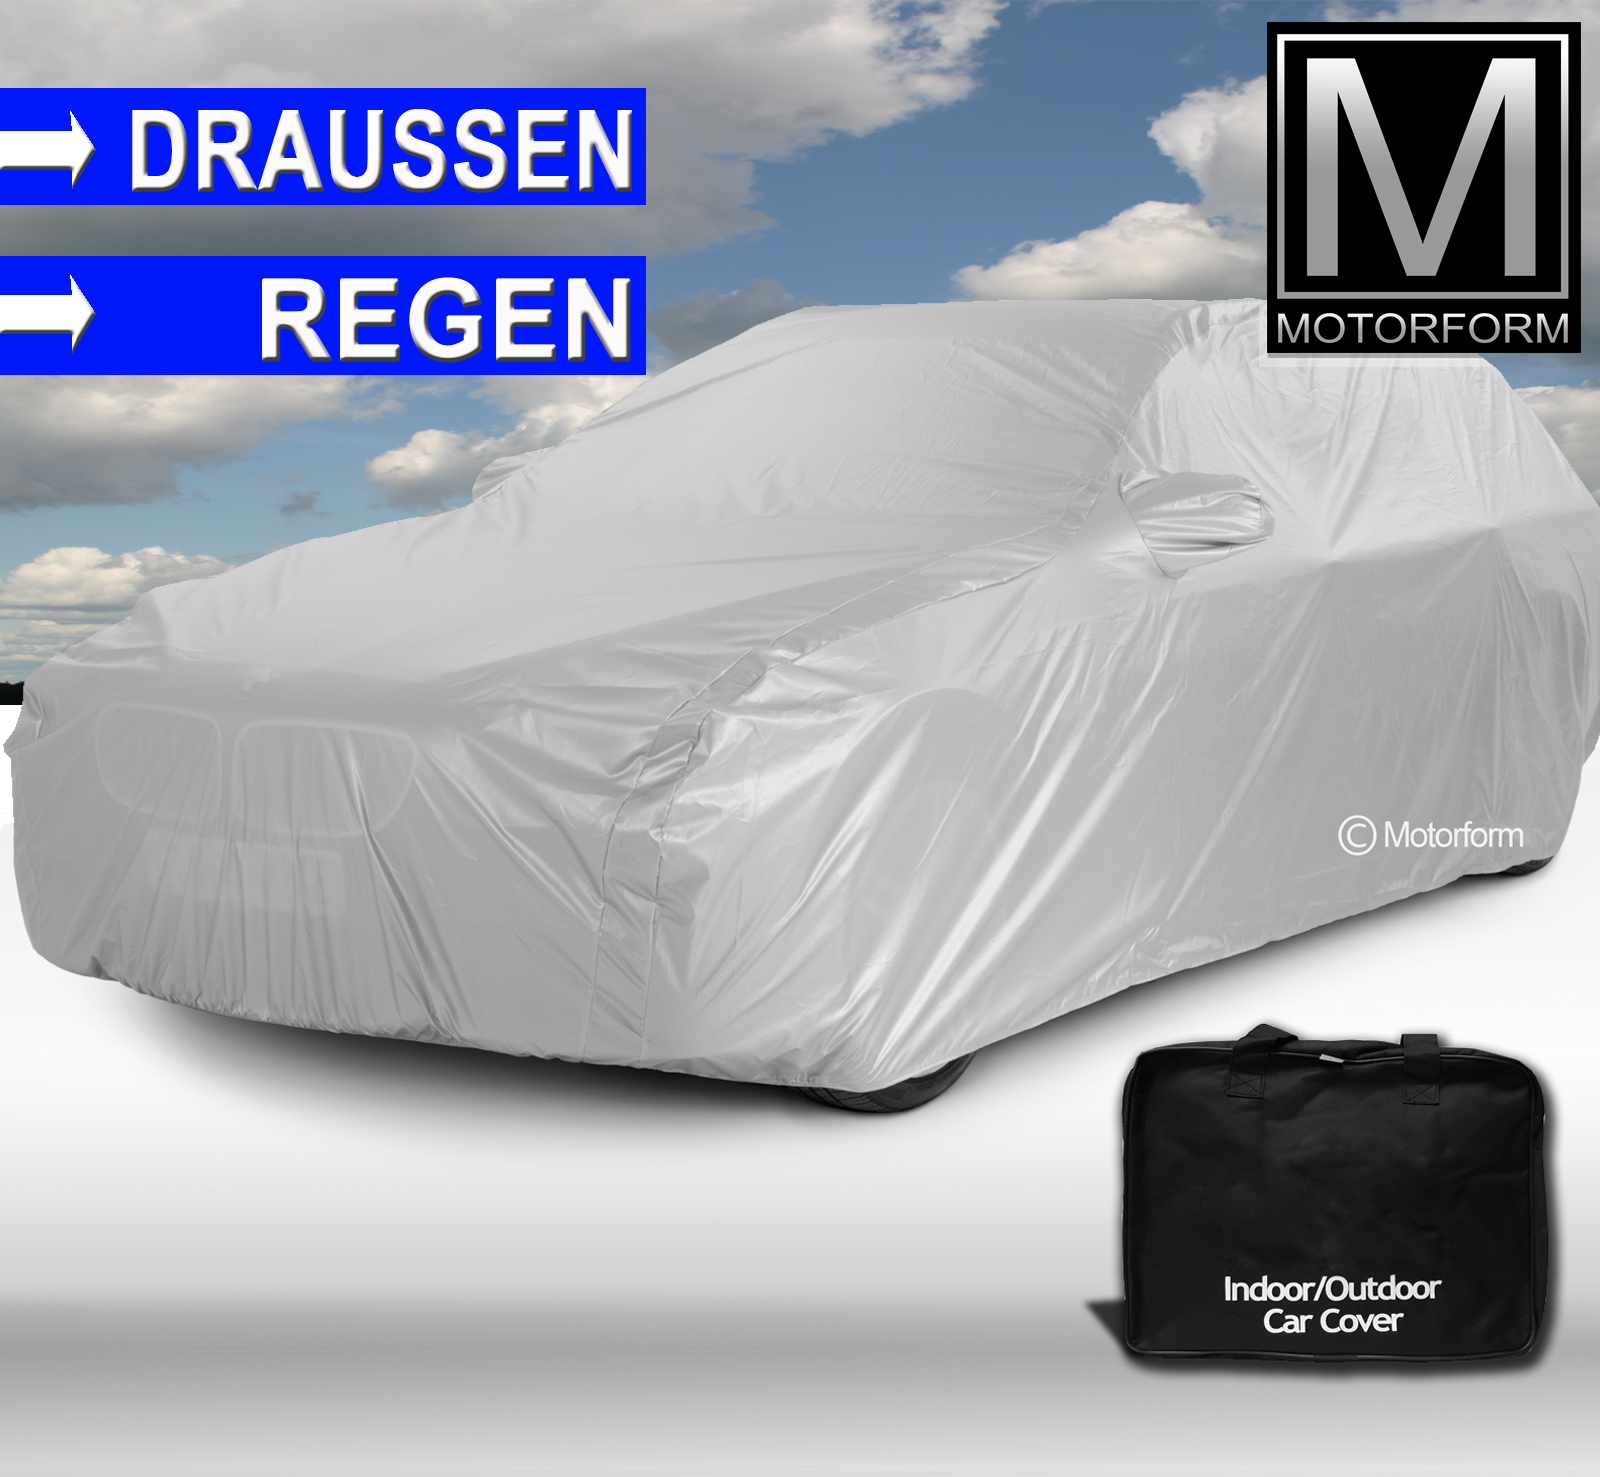 Voyager Outdoor Car Cover for Mercedes C-Class W204 Estate (2007